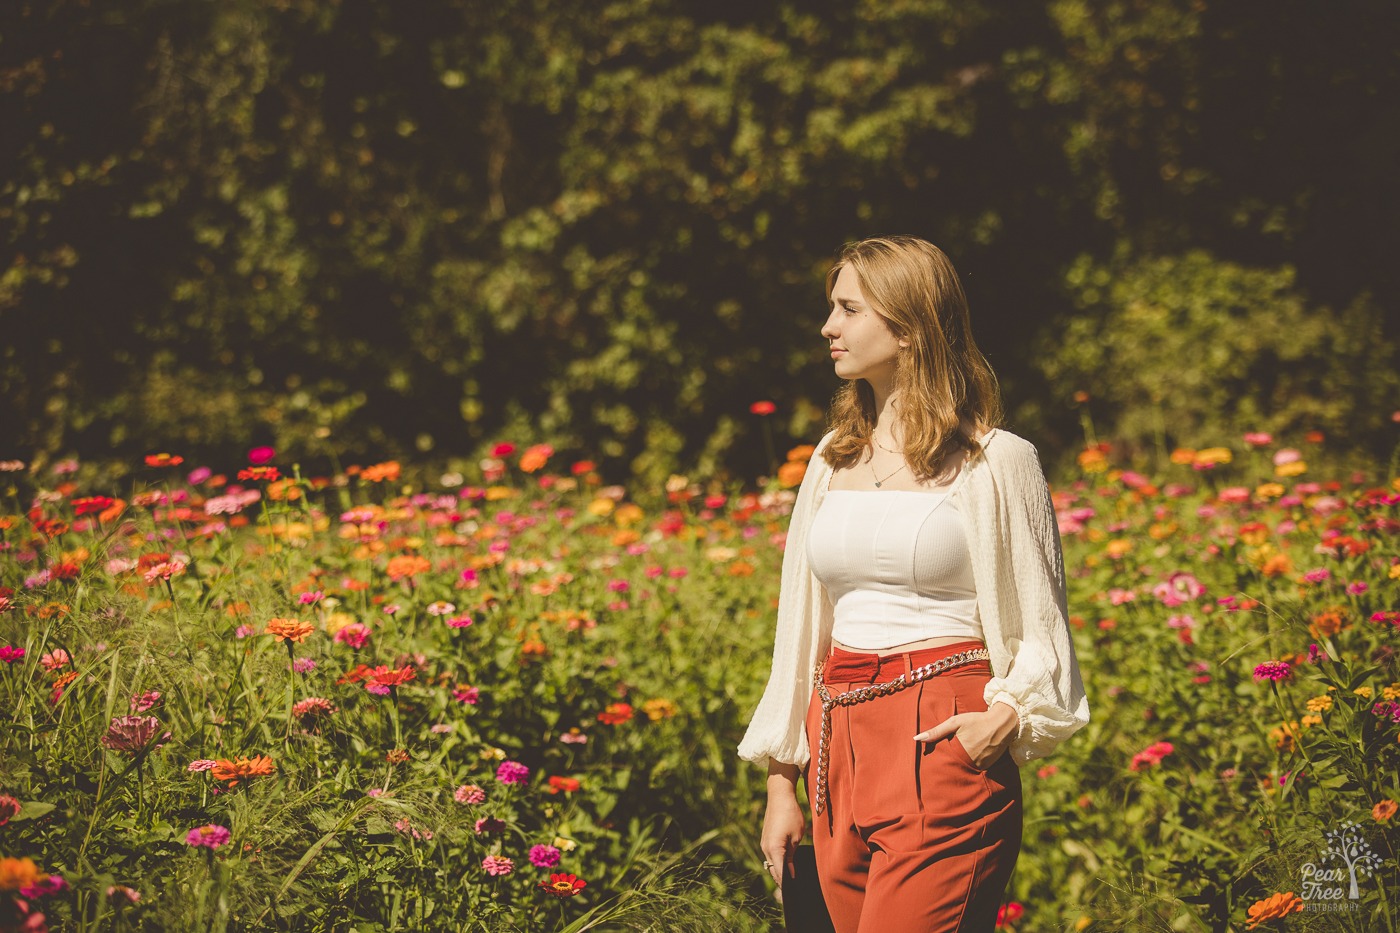 Beautiful Creekview high school senior girl standing with hand in pocket and looking out over a field of wildflowers